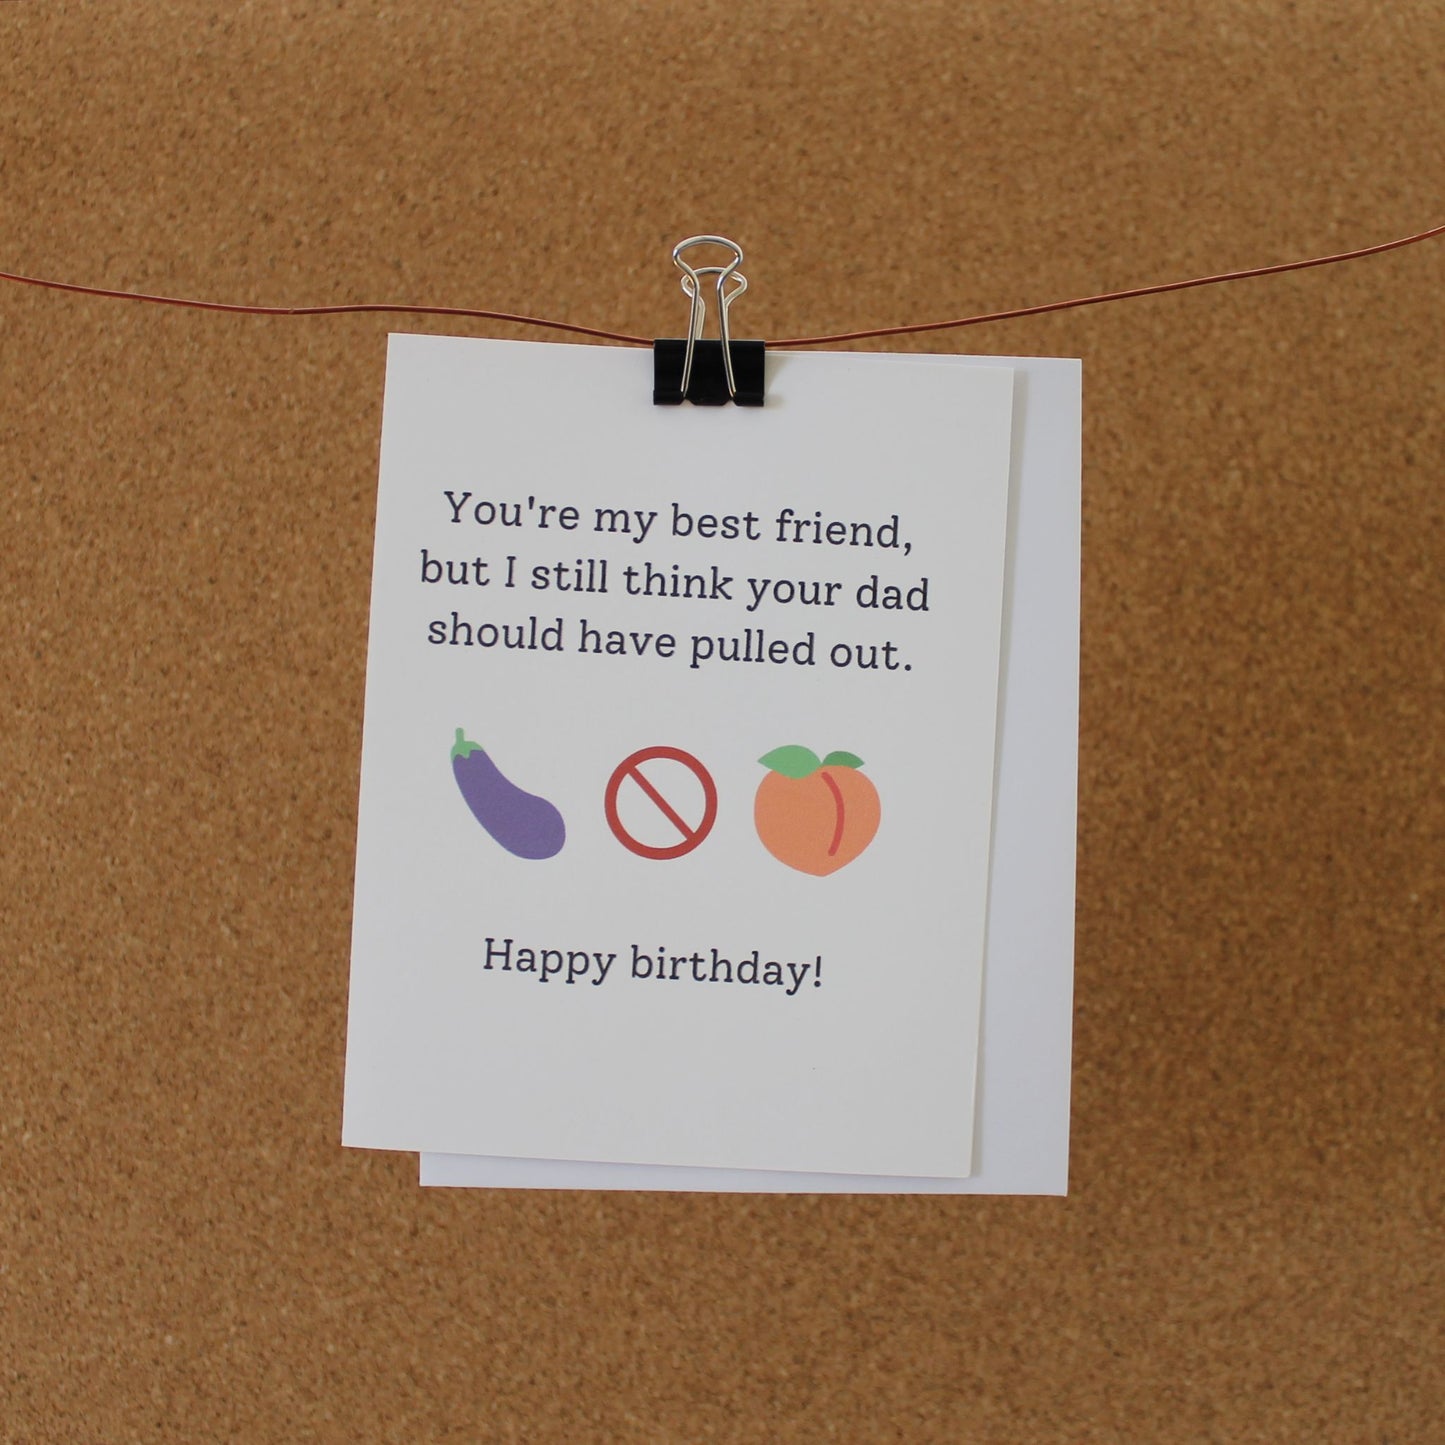 Funny Birthday Card: "You're my best friend but I still think your dad should have pulled out."